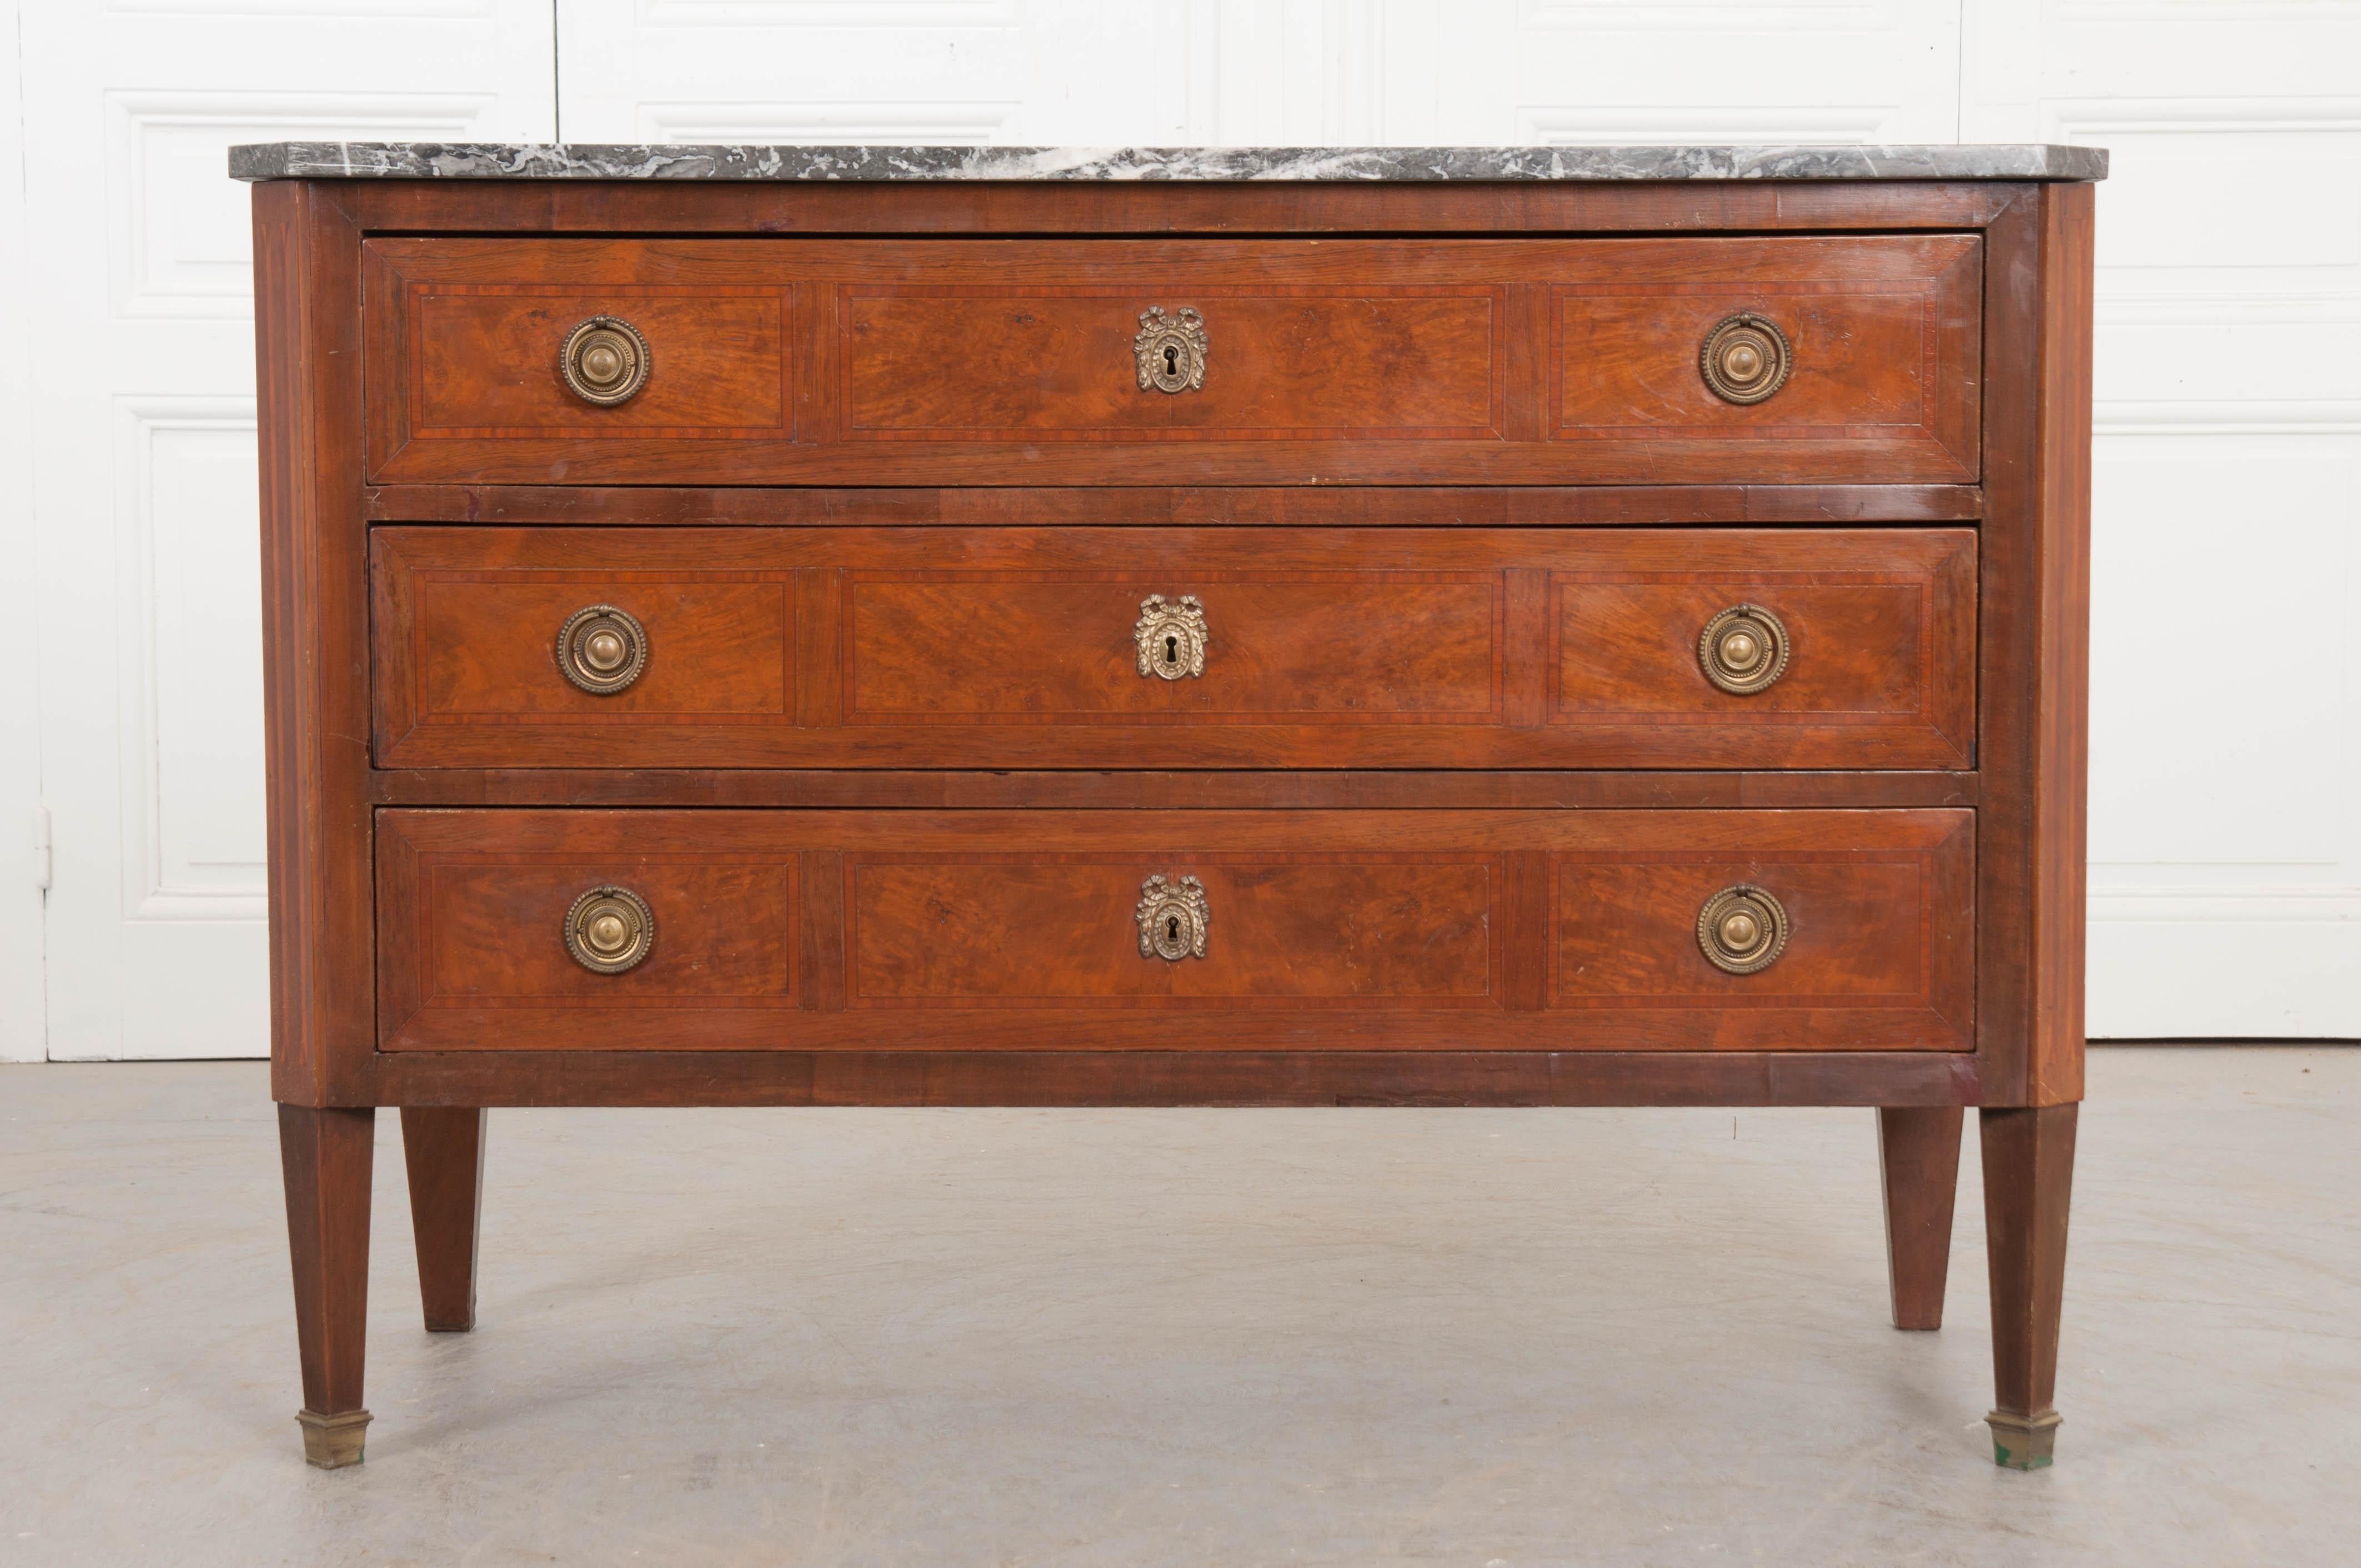 Outstanding inlay graces nearly every surface of this beautiful 19th century French Directoire style commode. The commode features a gray marble top, which is in wonderful antique condition, that has canted corners that match those on the body. The